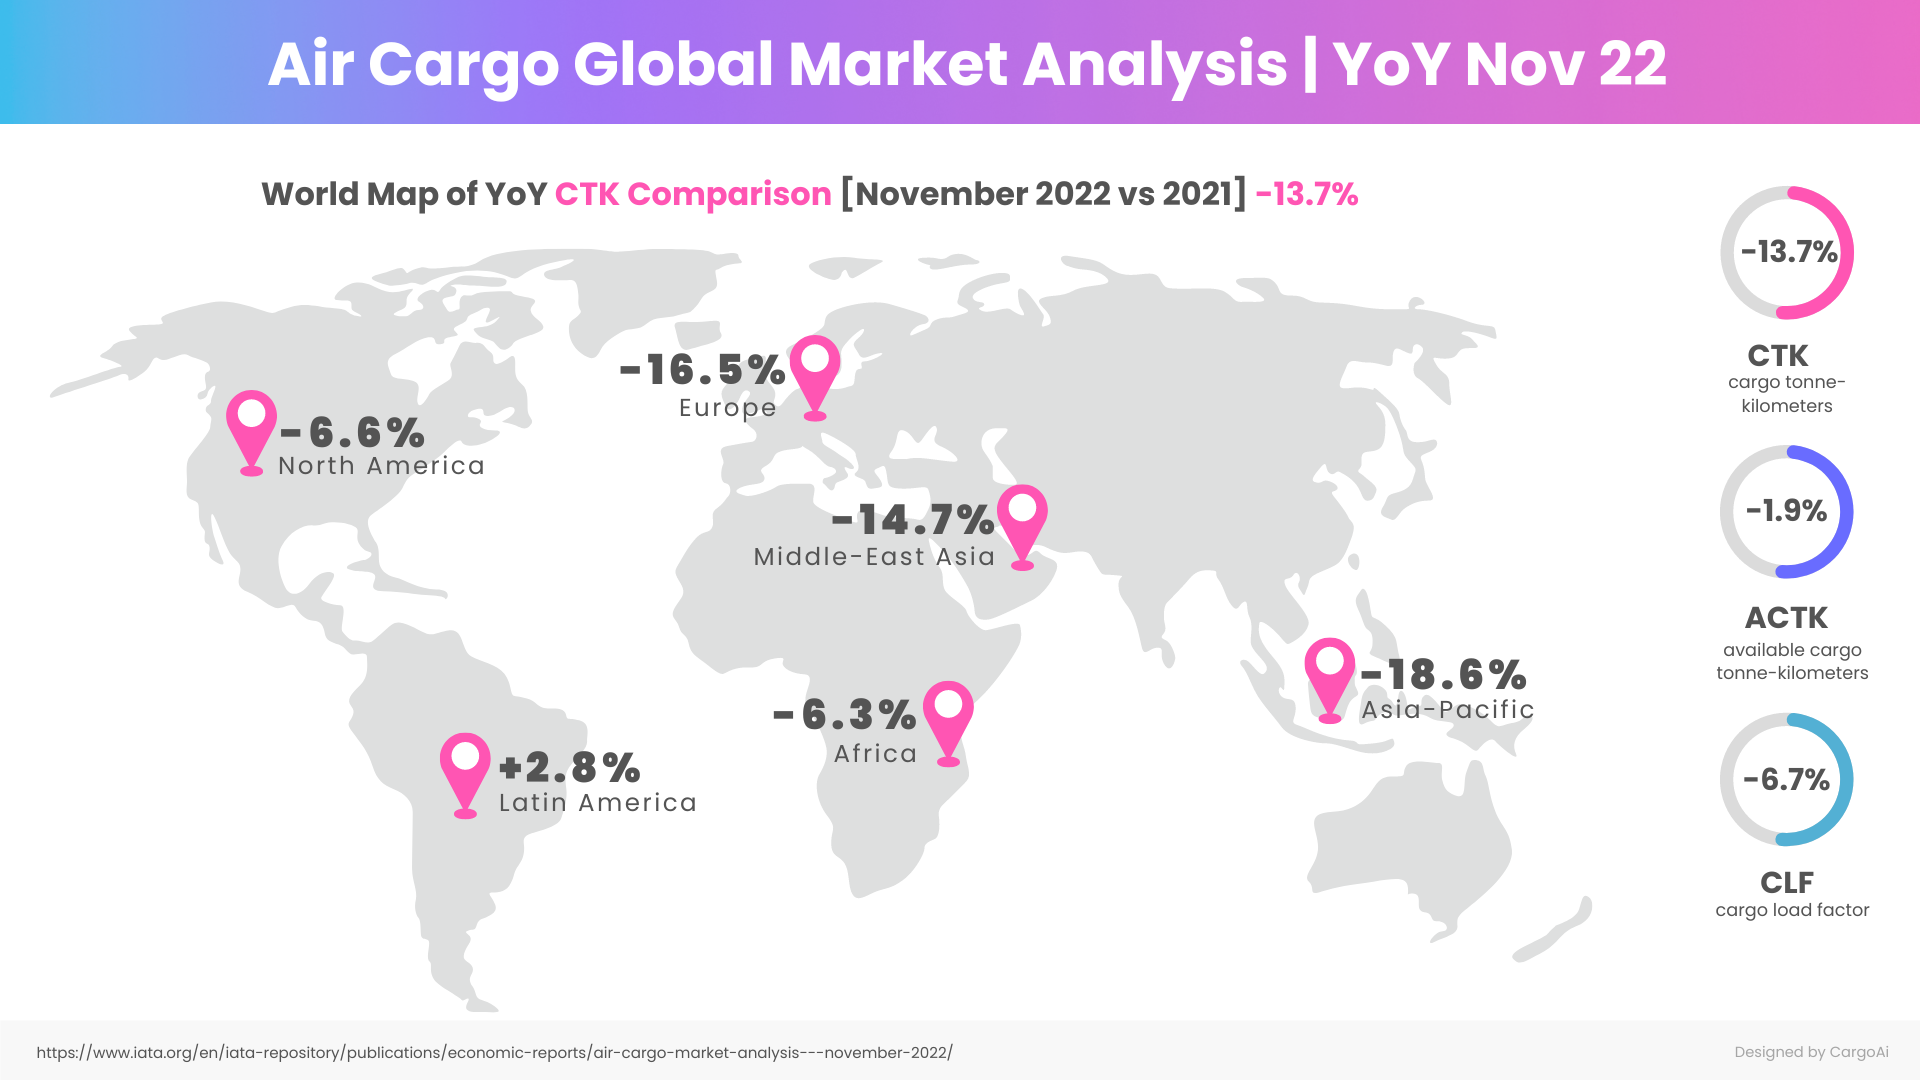 Air Cargo Global chargeable weight analysis of Dec 2022